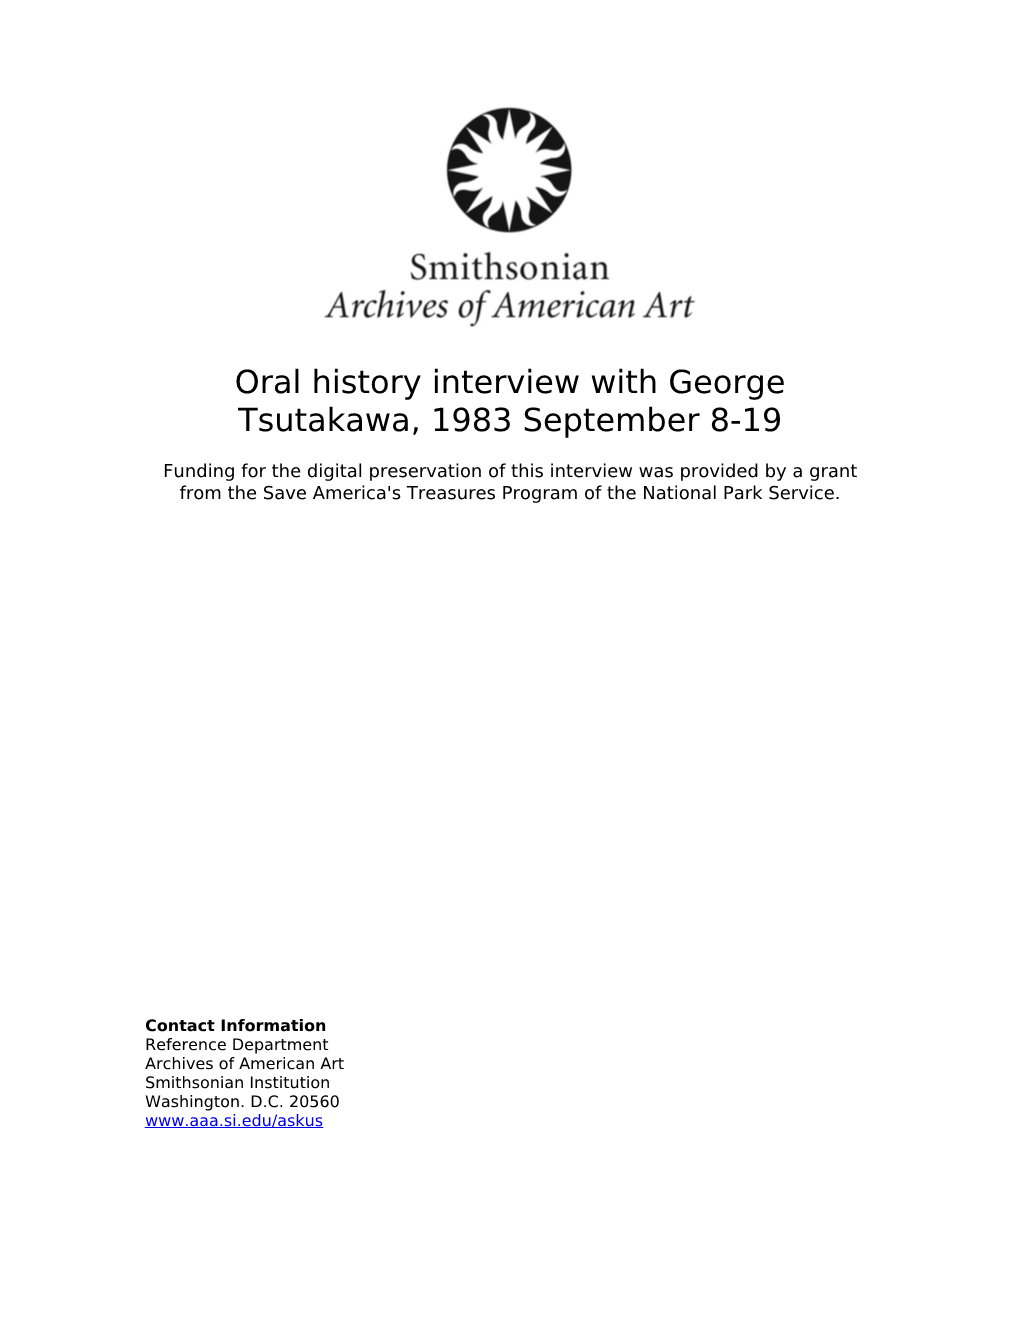 Oral History Interview with George Tsutakawa, 1983 September 8-19